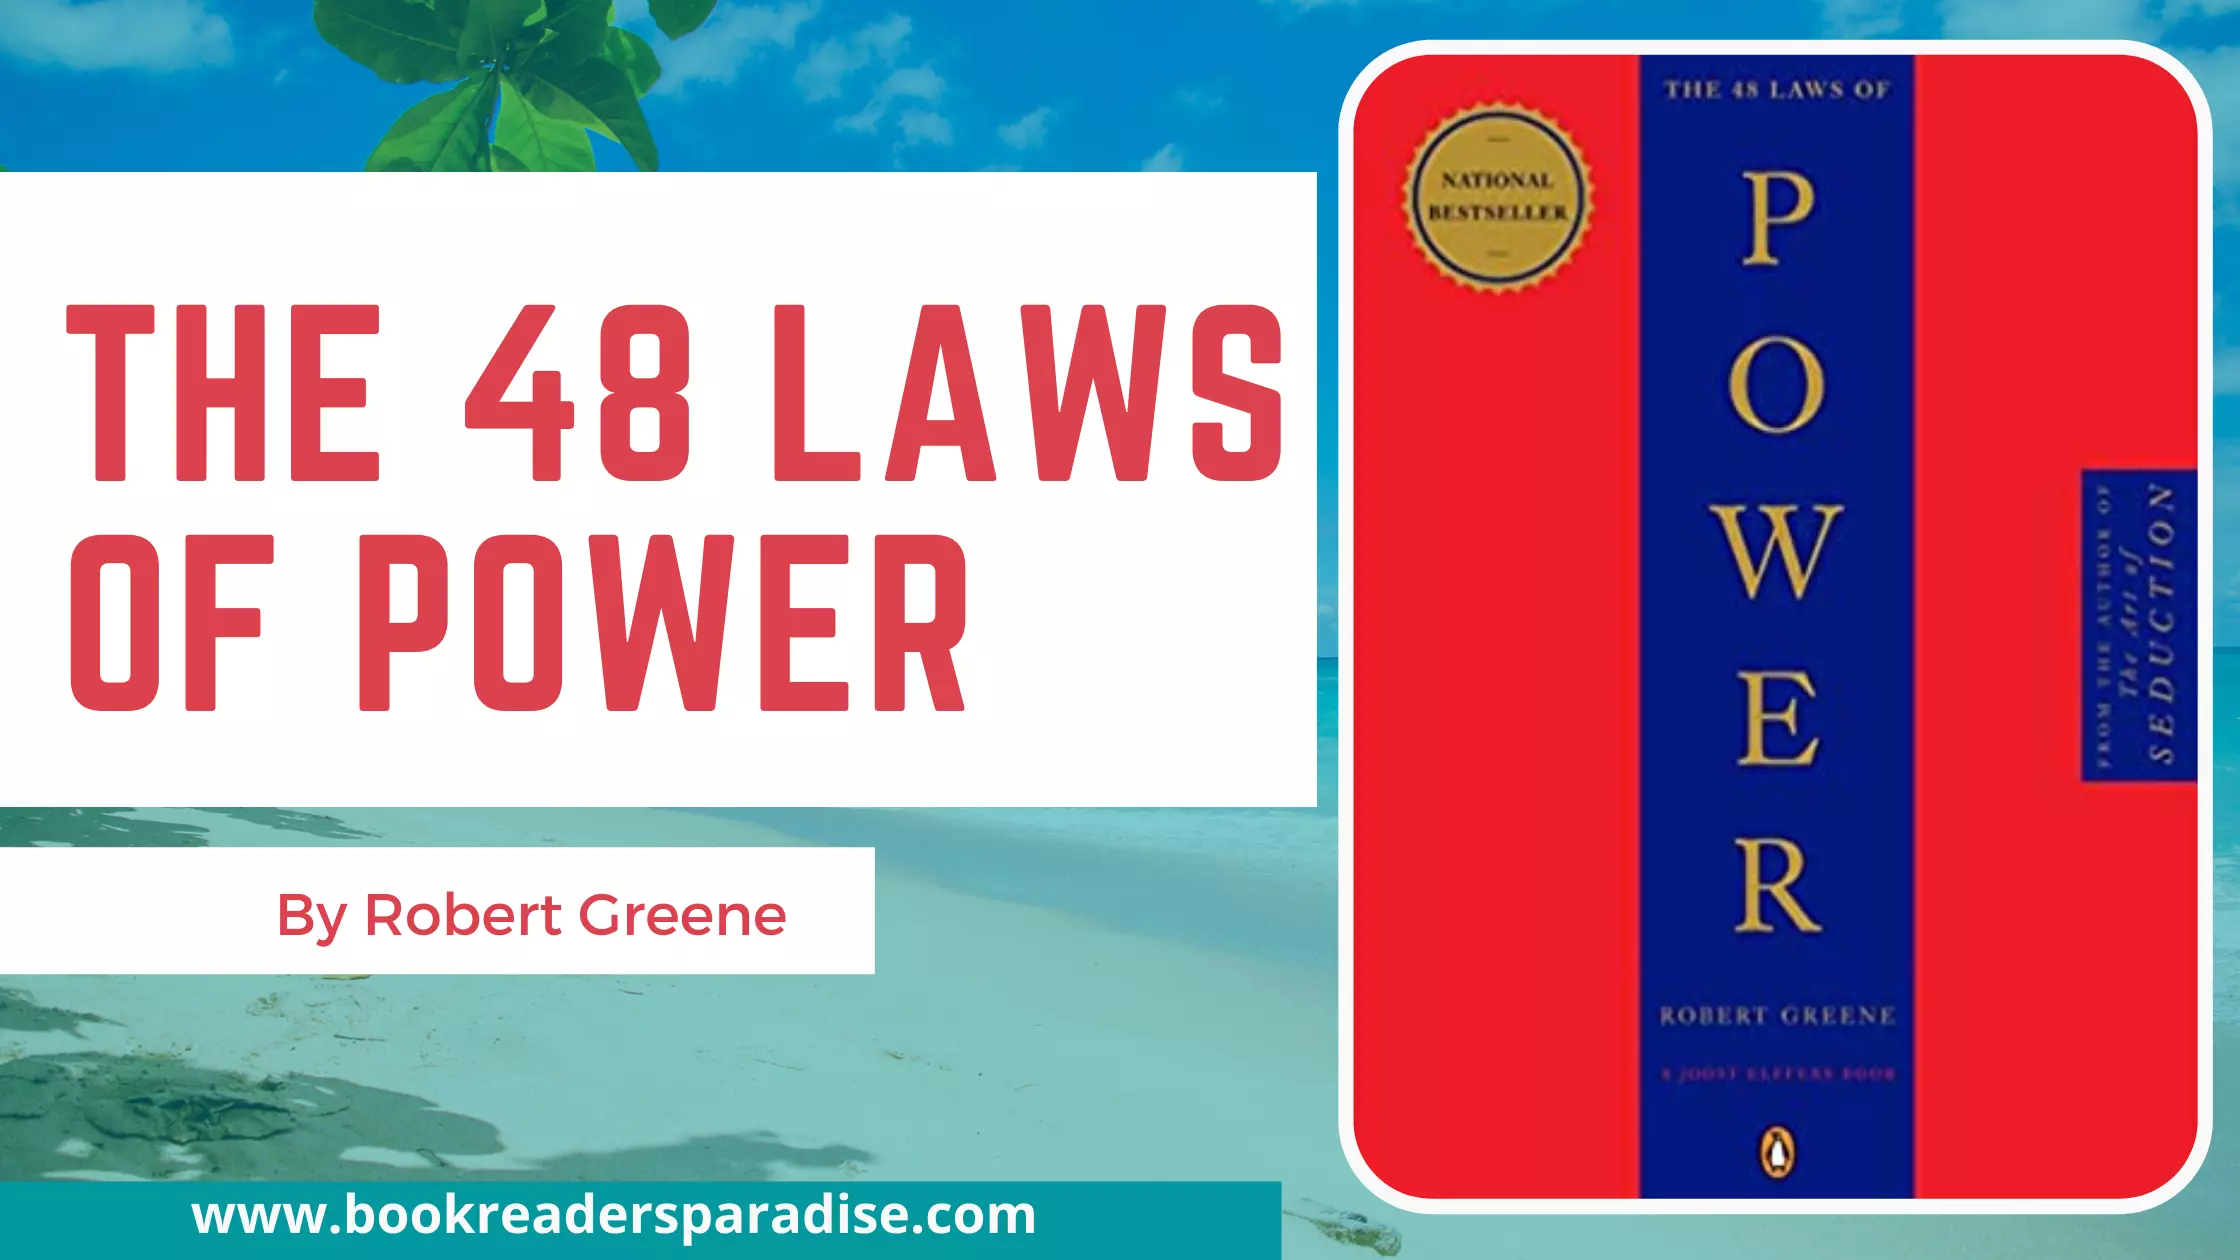 the-48-laws-of-power-pdf-audiobook-summary-free-download-details